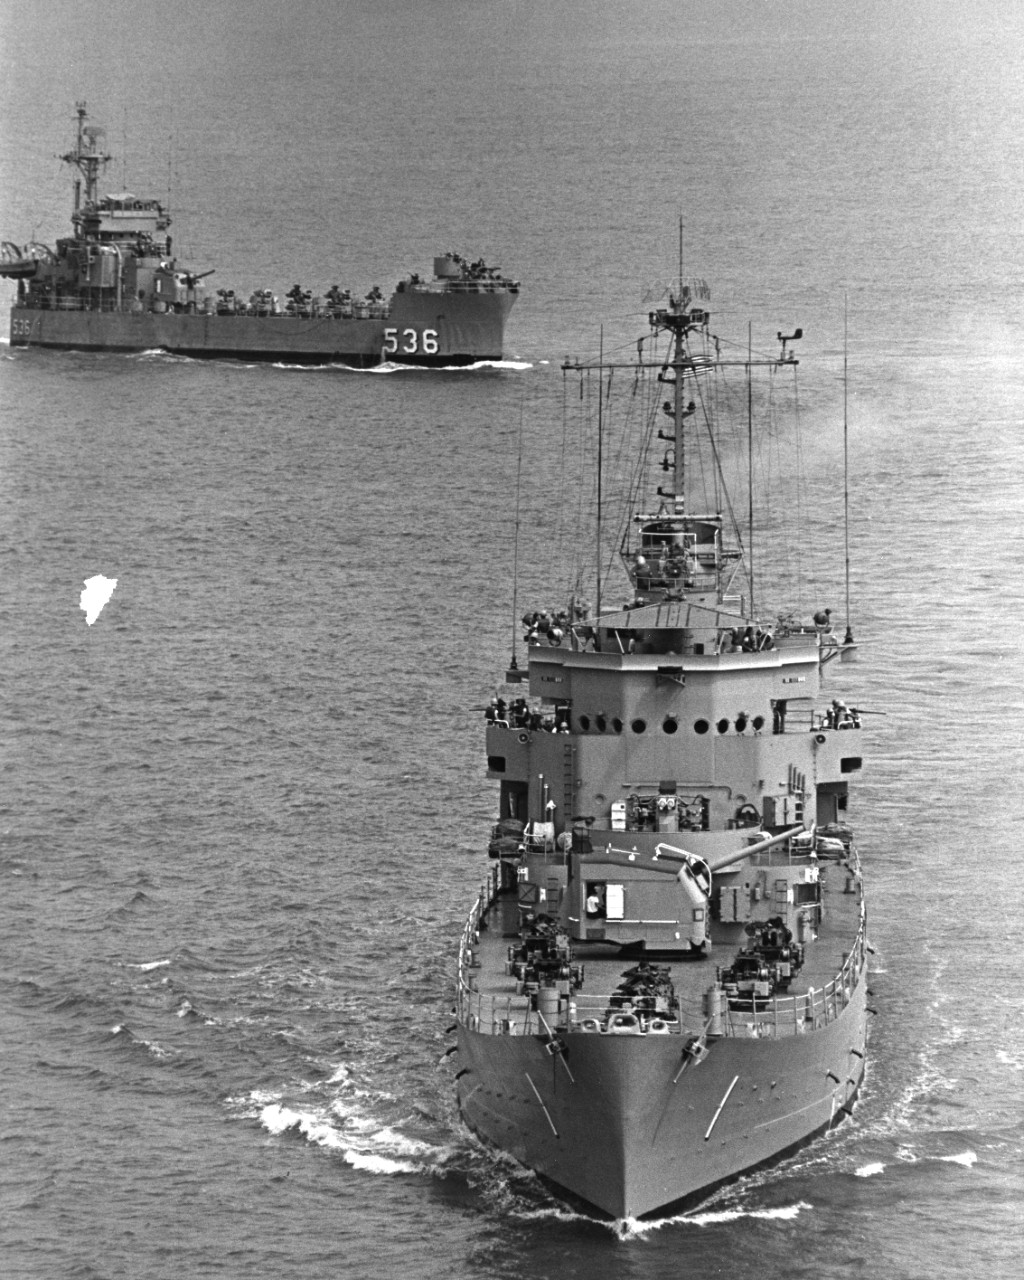 USS Carronade (IFS-1) steams off the coast of Danang, South Vietnam. USS White River (LSMR-536) steams in the background. Both are rocket firing ships.